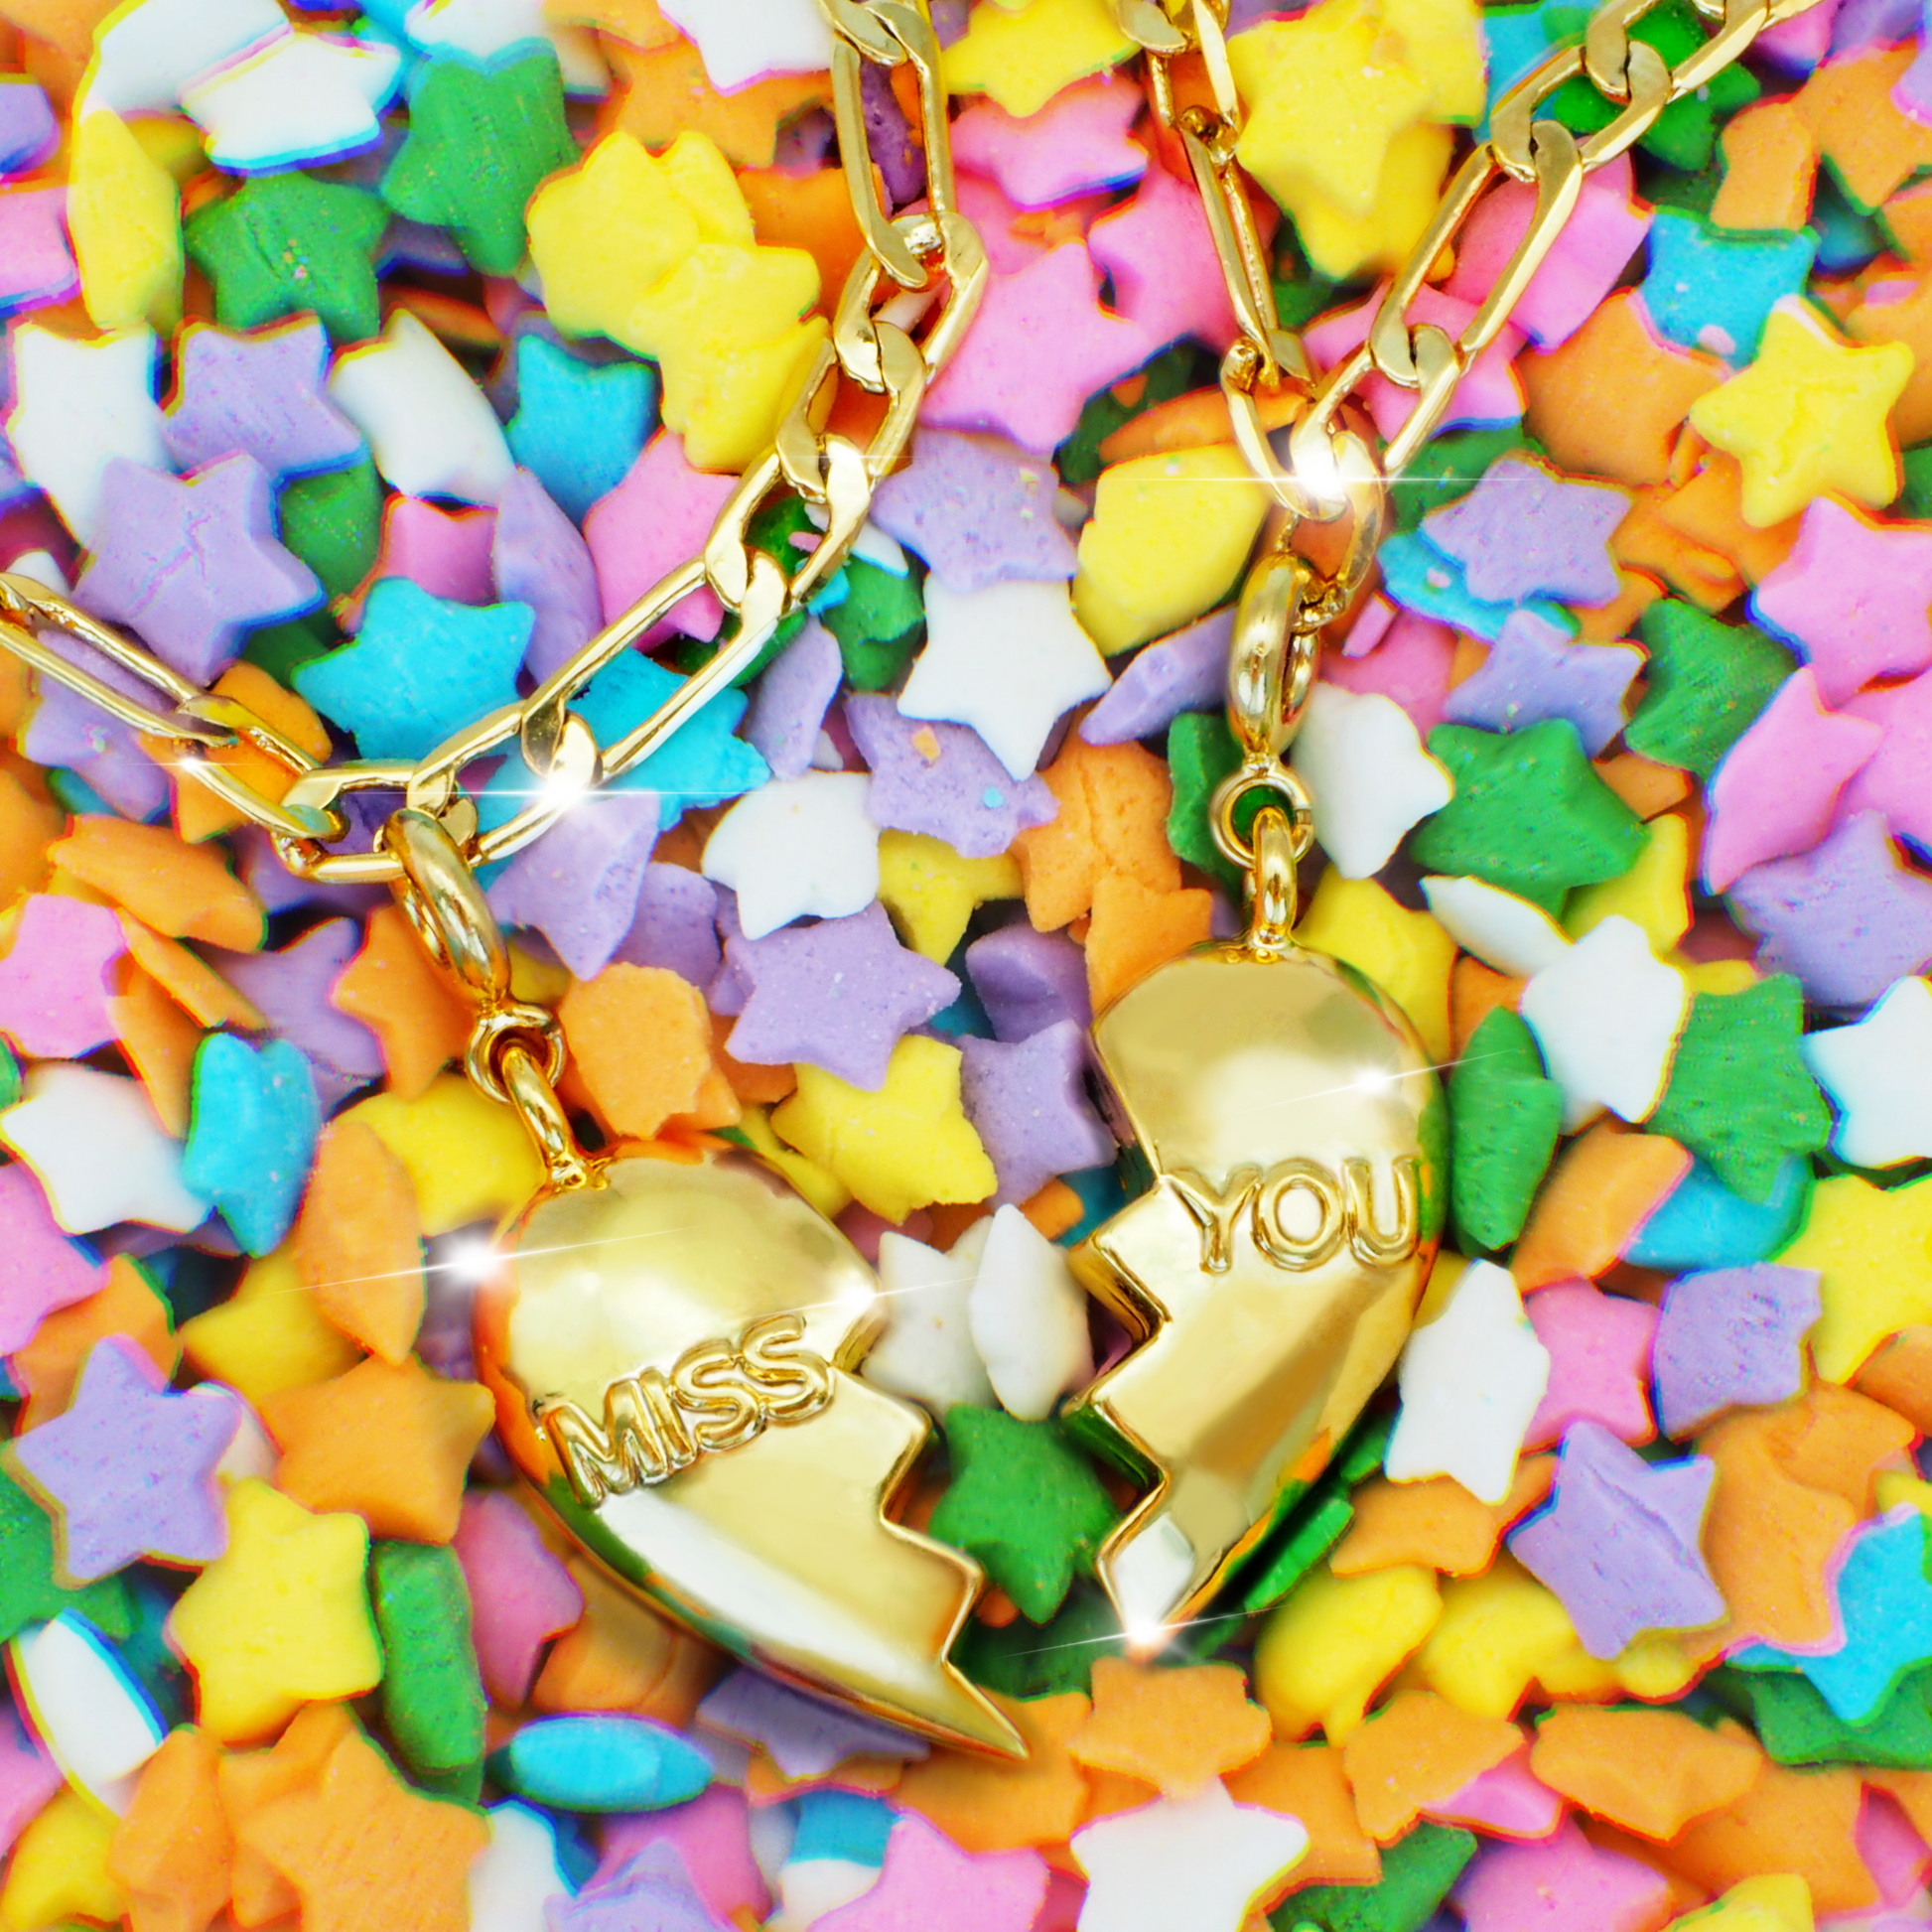 Gold 'Miss You' Friendship Heart Charms - Bunx